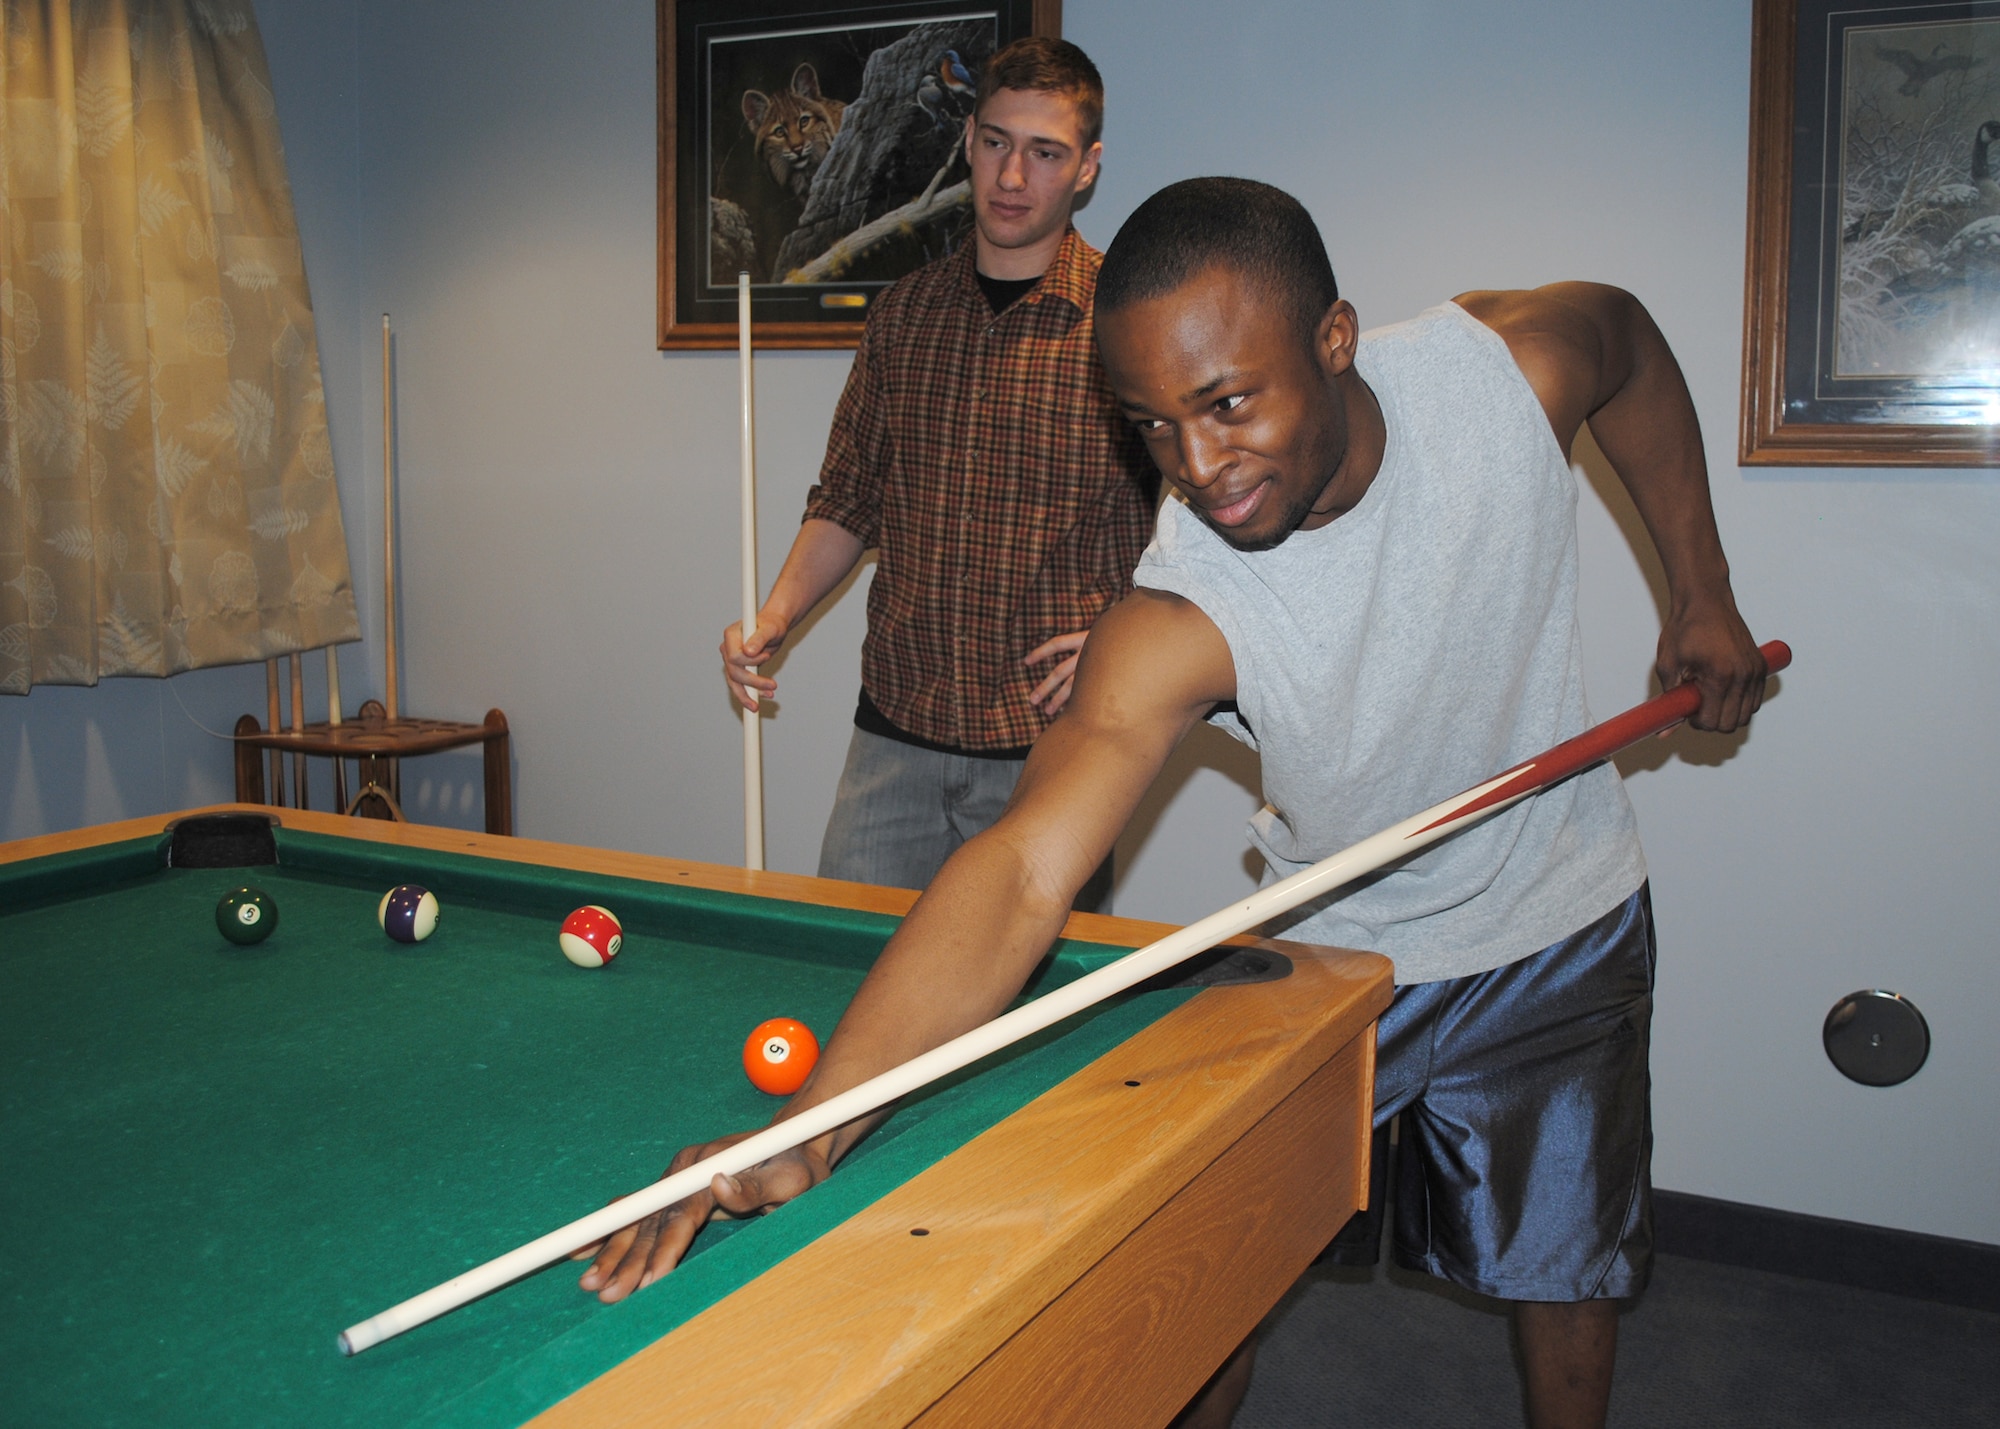 Airman 1st Class Oluwatobiloba Odesanya, right, 341st Logistics Readiness Squadron vehicle equipment apprentice, and Airman Rory Stodgell, 341st LRS traffic management apprentice, play a game of pool in Bldg. 635. Malmstrom Air Force Base's dormitory complex provides its residents multiple dayrooms with cable, television and video game systems.  (U.S. Air Force photo/Airman 1st Class Katrina Heikkinen)